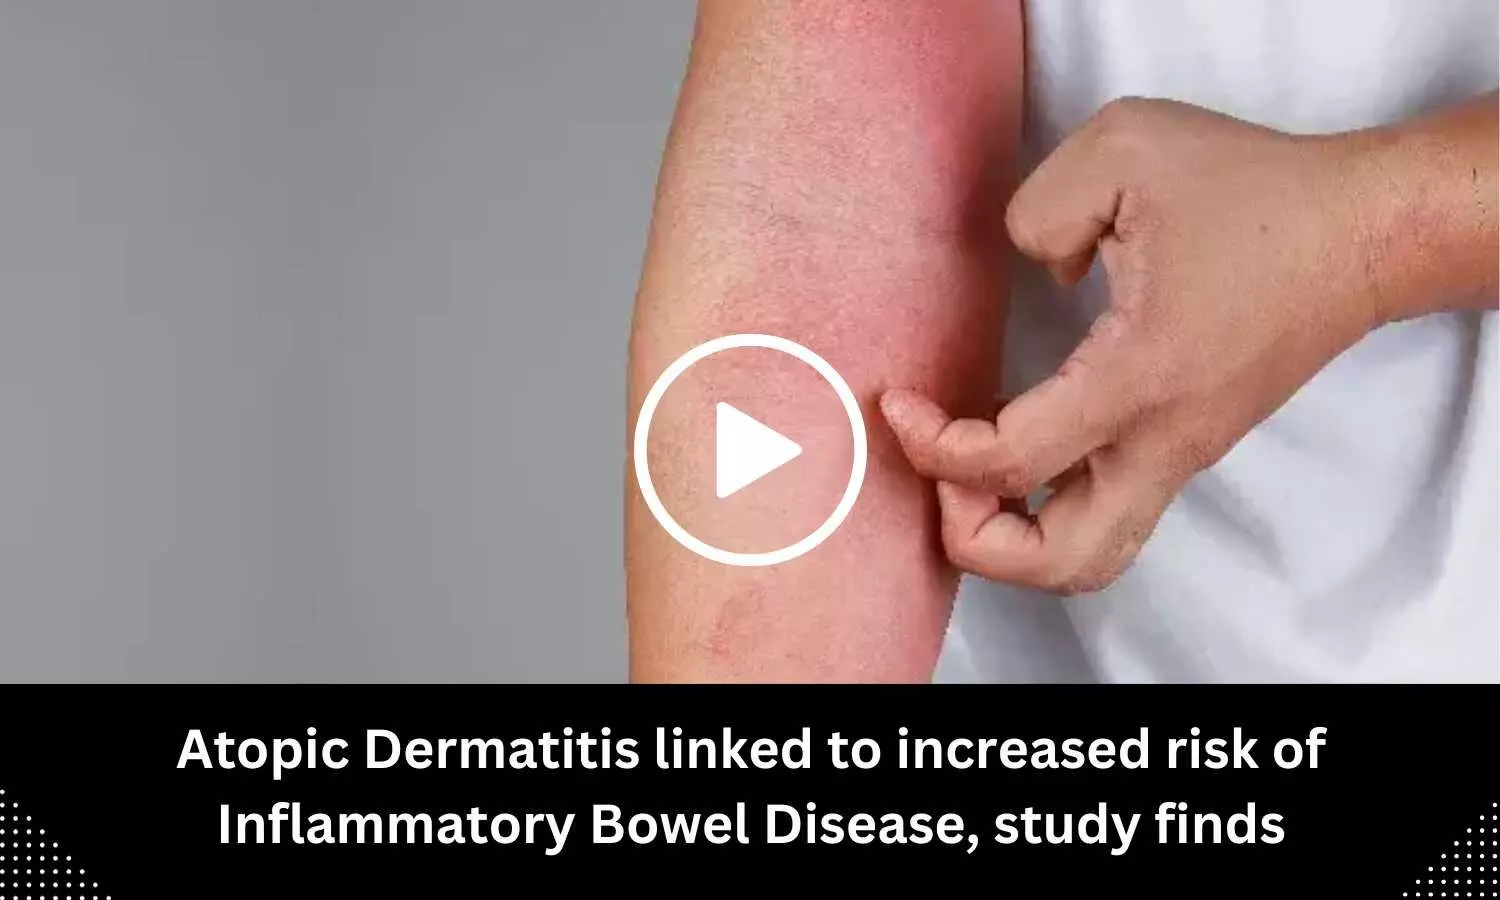 Atopic Dermatitis linked to increased risk of Inflammatory Bowel Disease, study finds